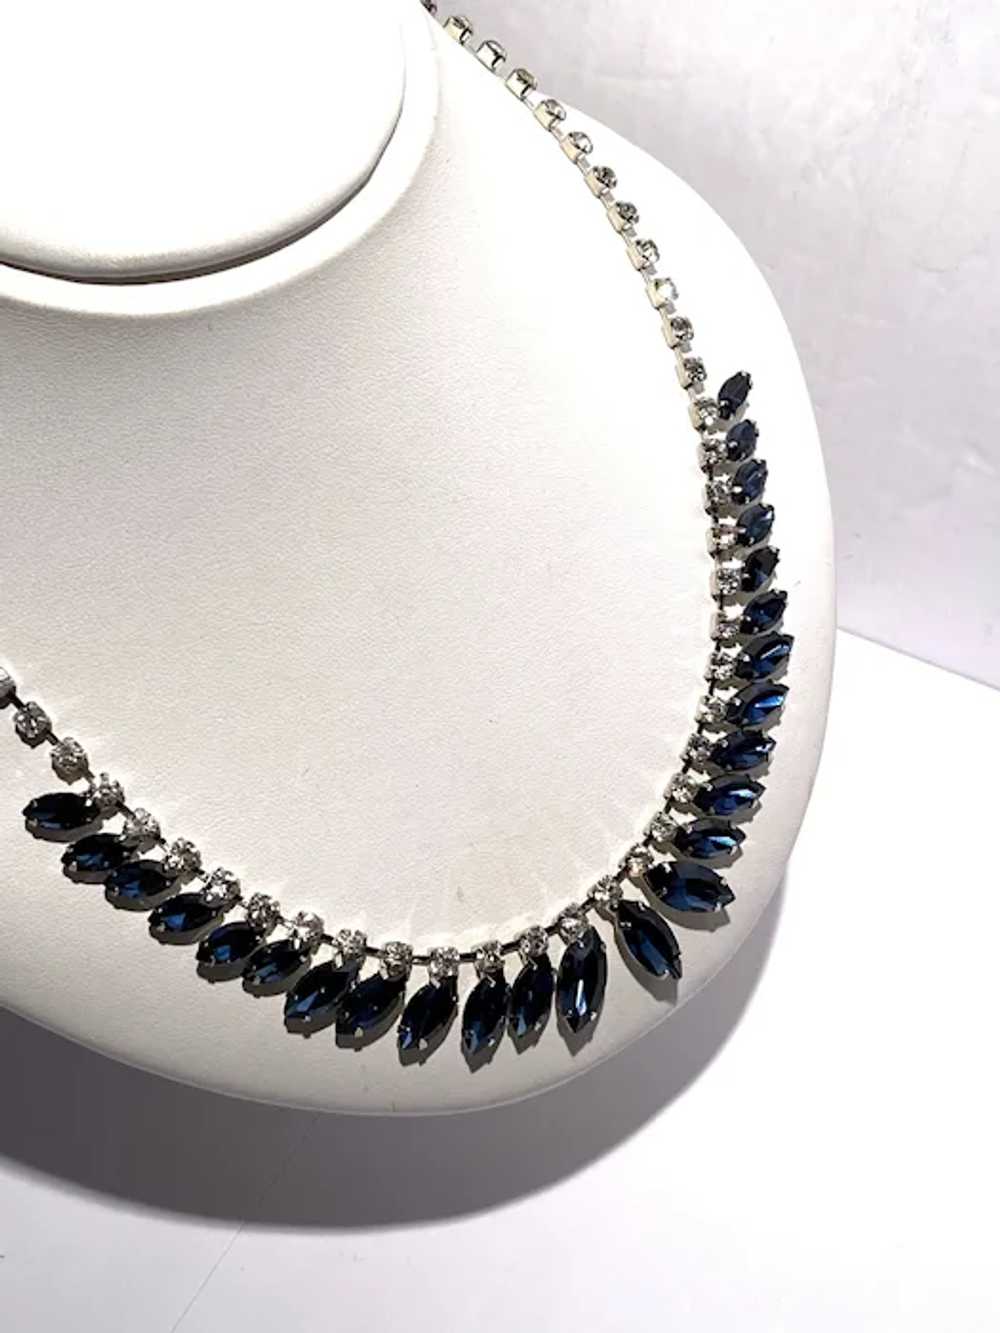 Blue and Clear Rhinestone Necklace for Prom - image 3